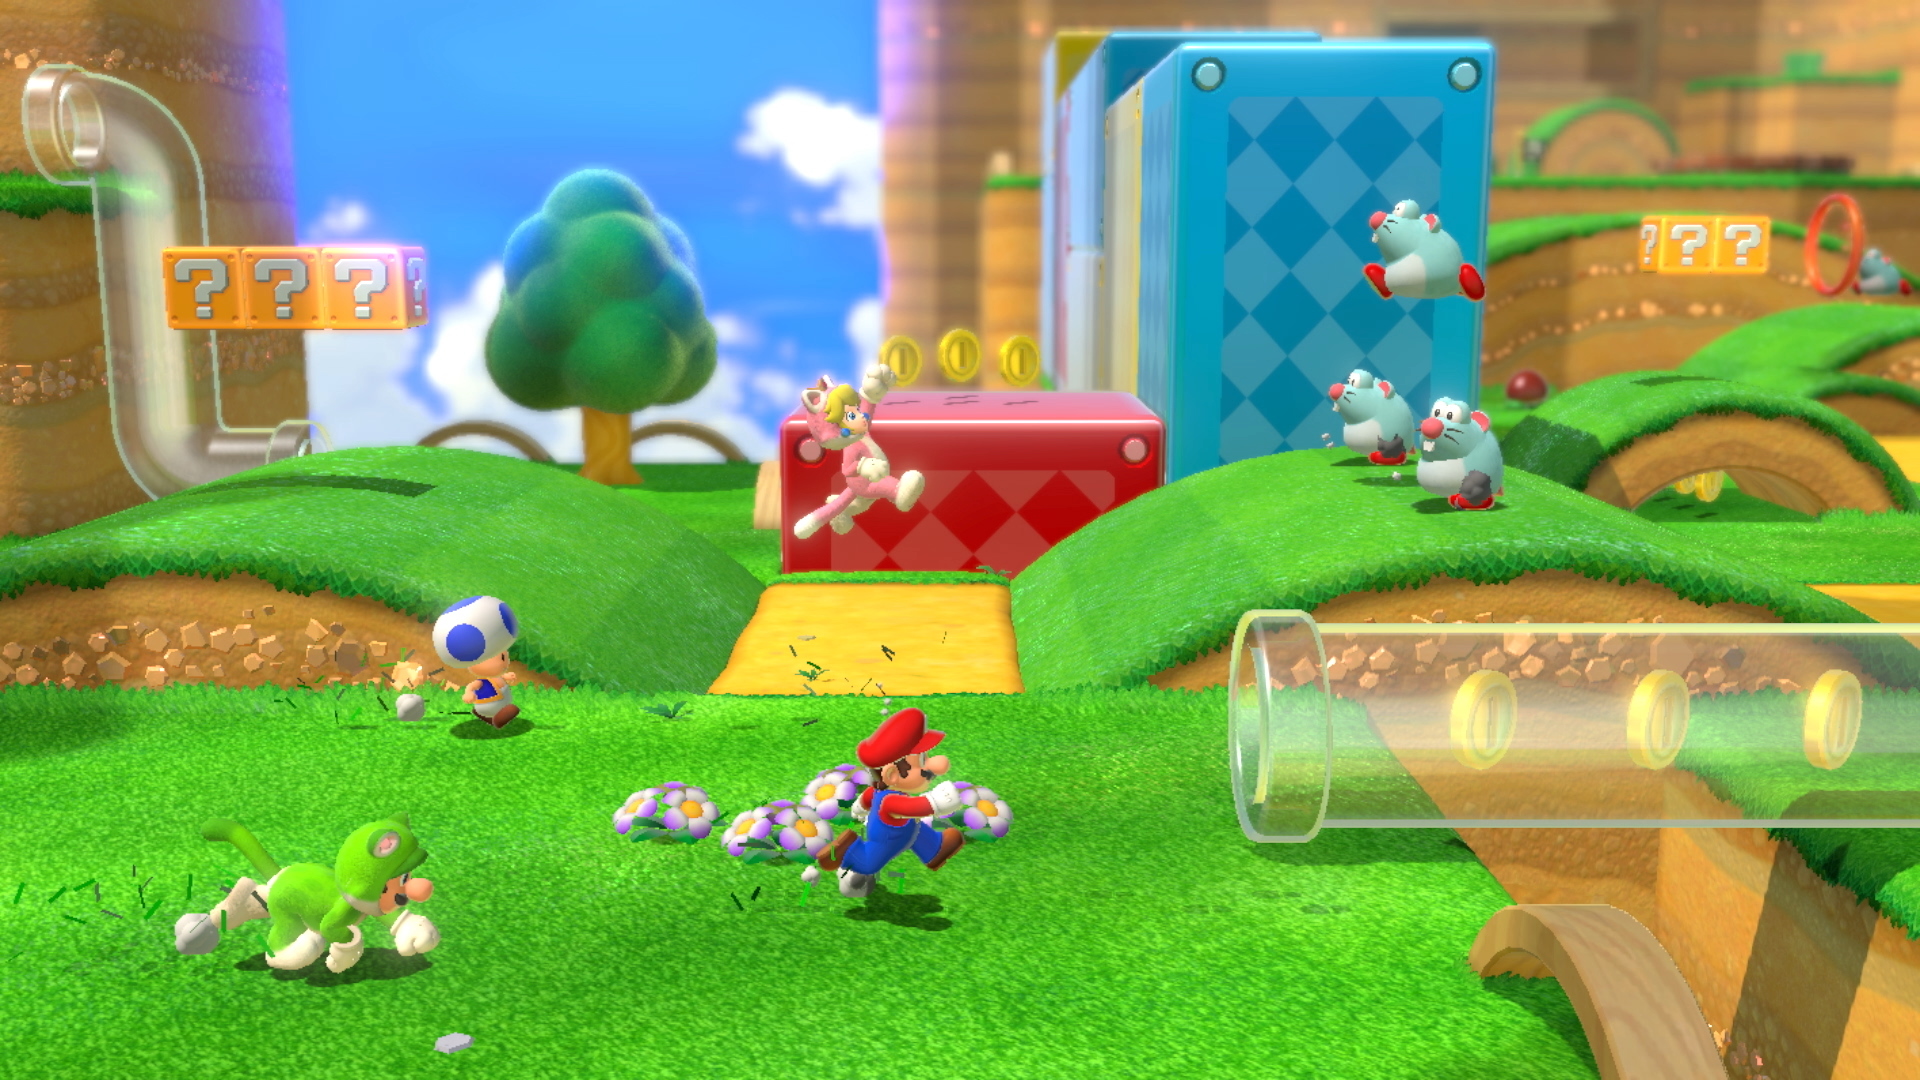 Mario 3d World Switch Parent's Guide to Super Mario 3D World + Bowser's Fury